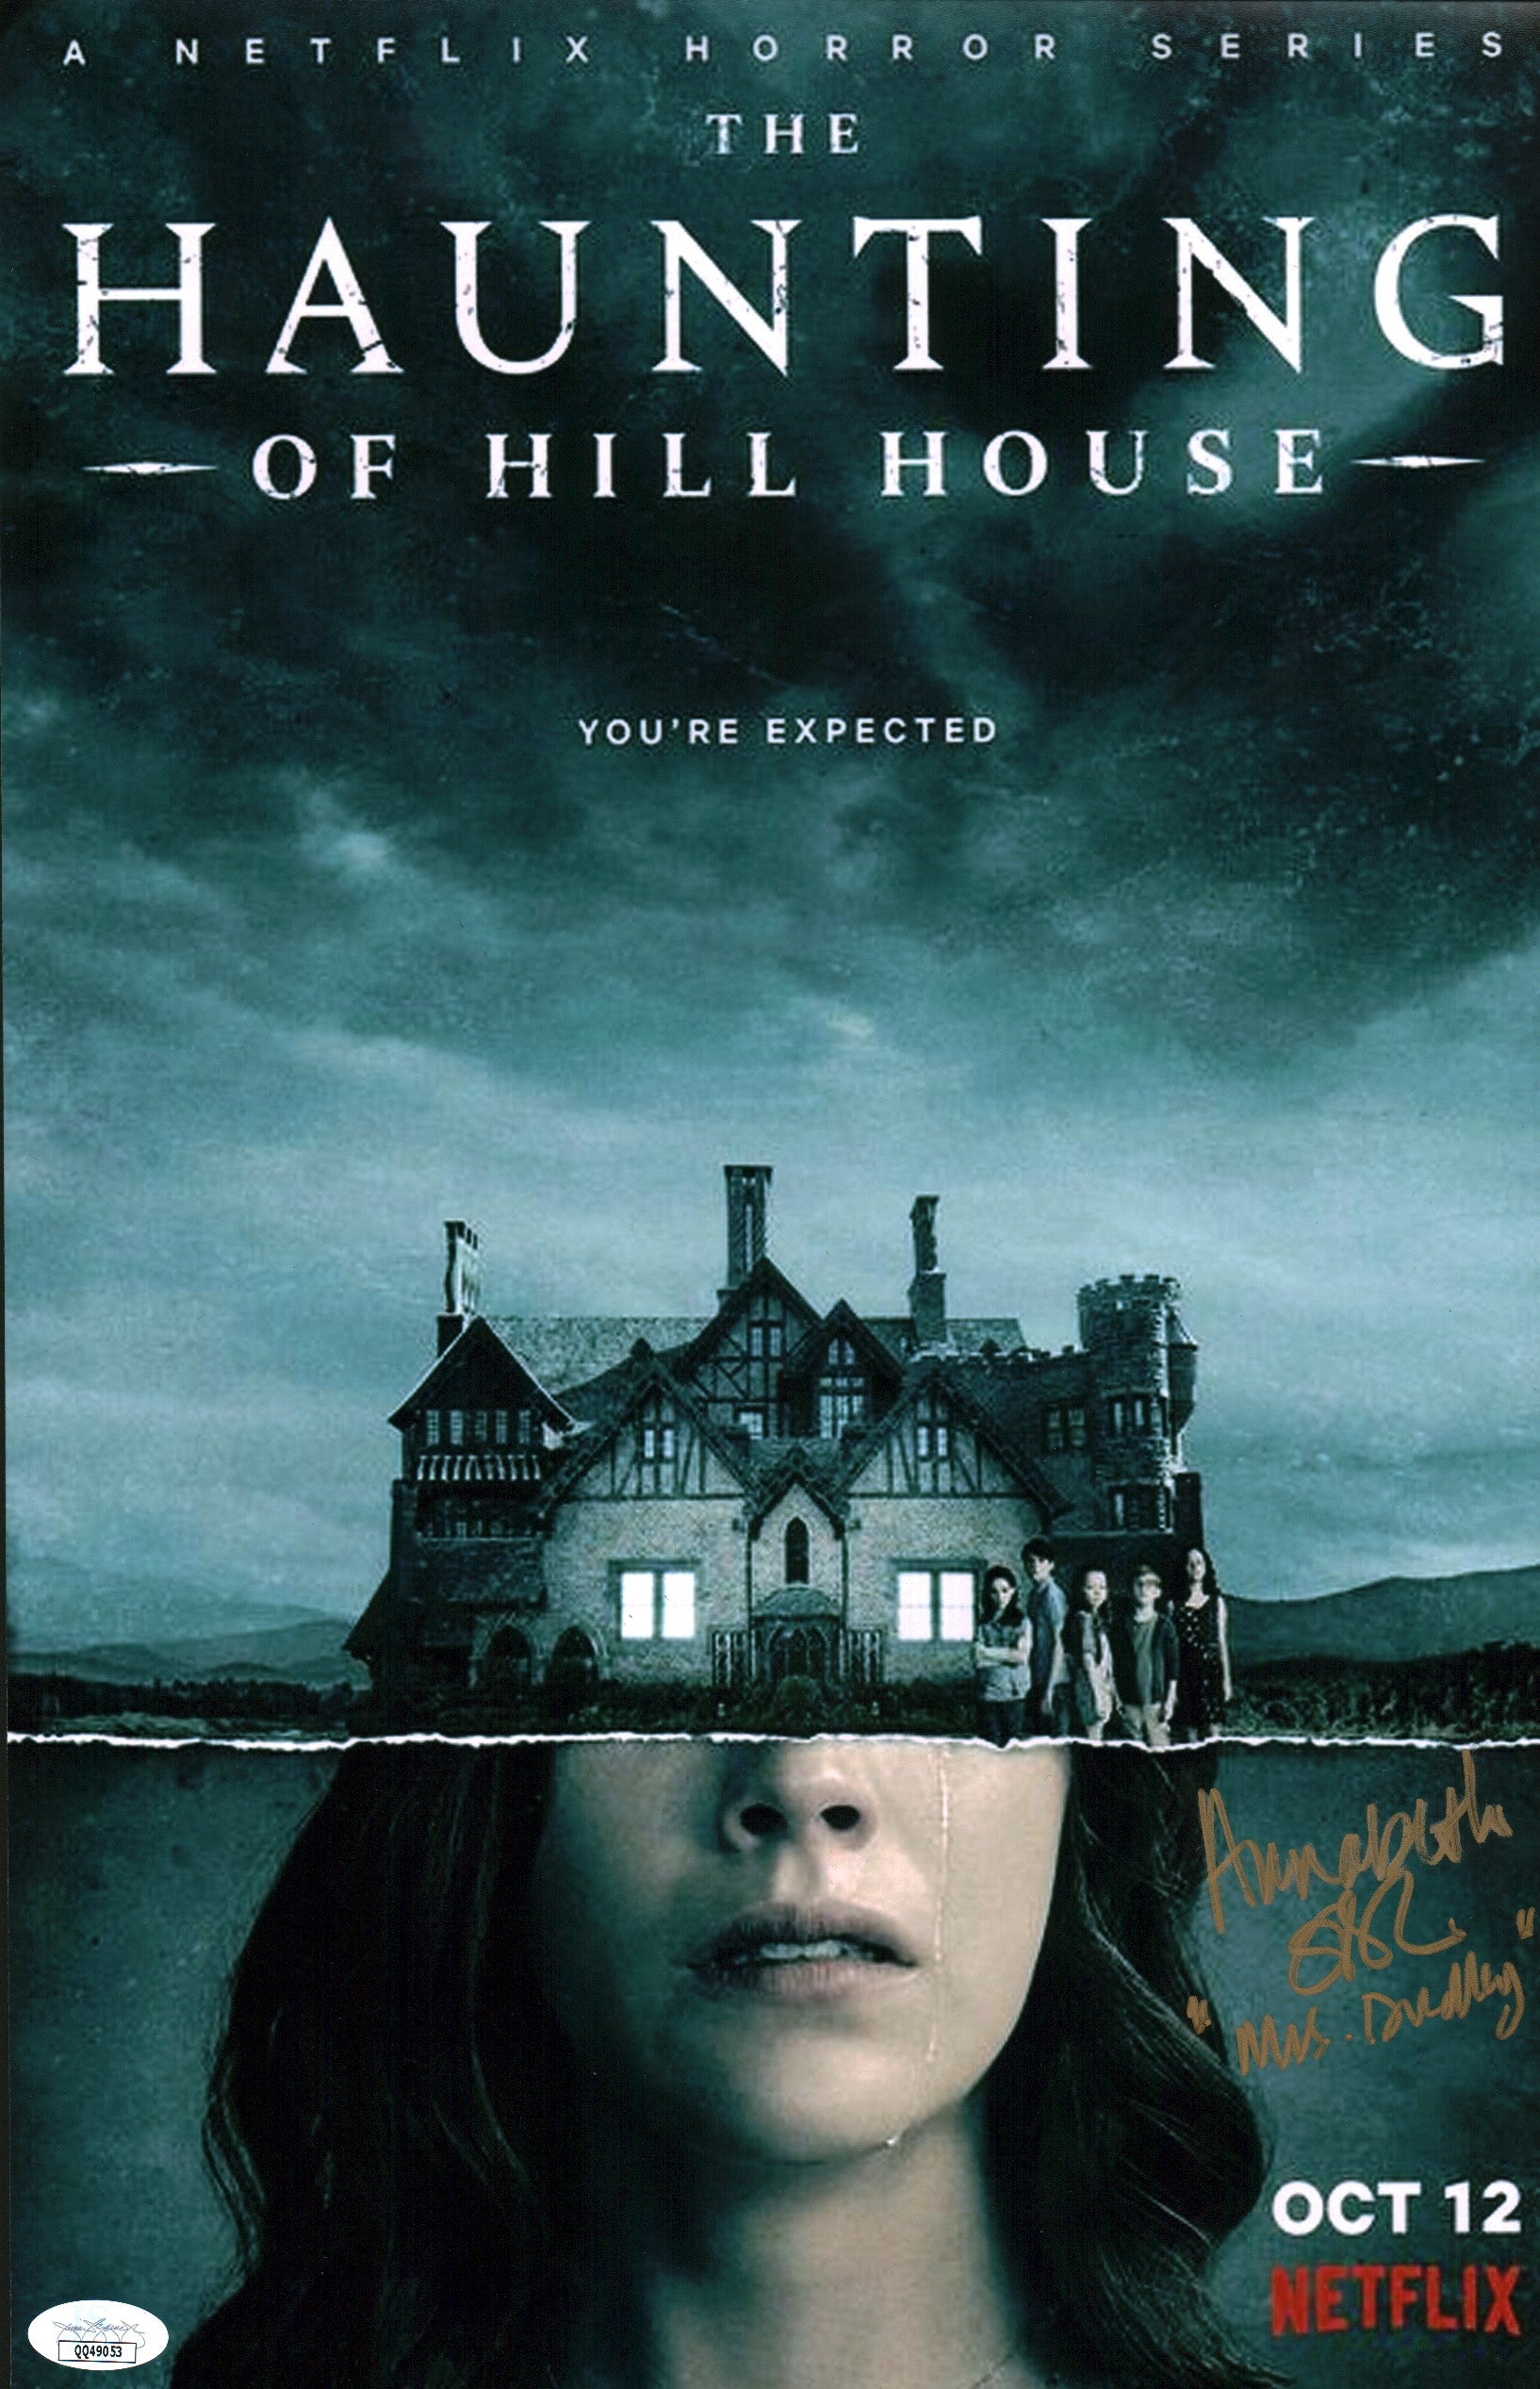 Annabeth Gish The Haunting of Hill House 11x17 Photo Poster Signed Autograph JSA Certified